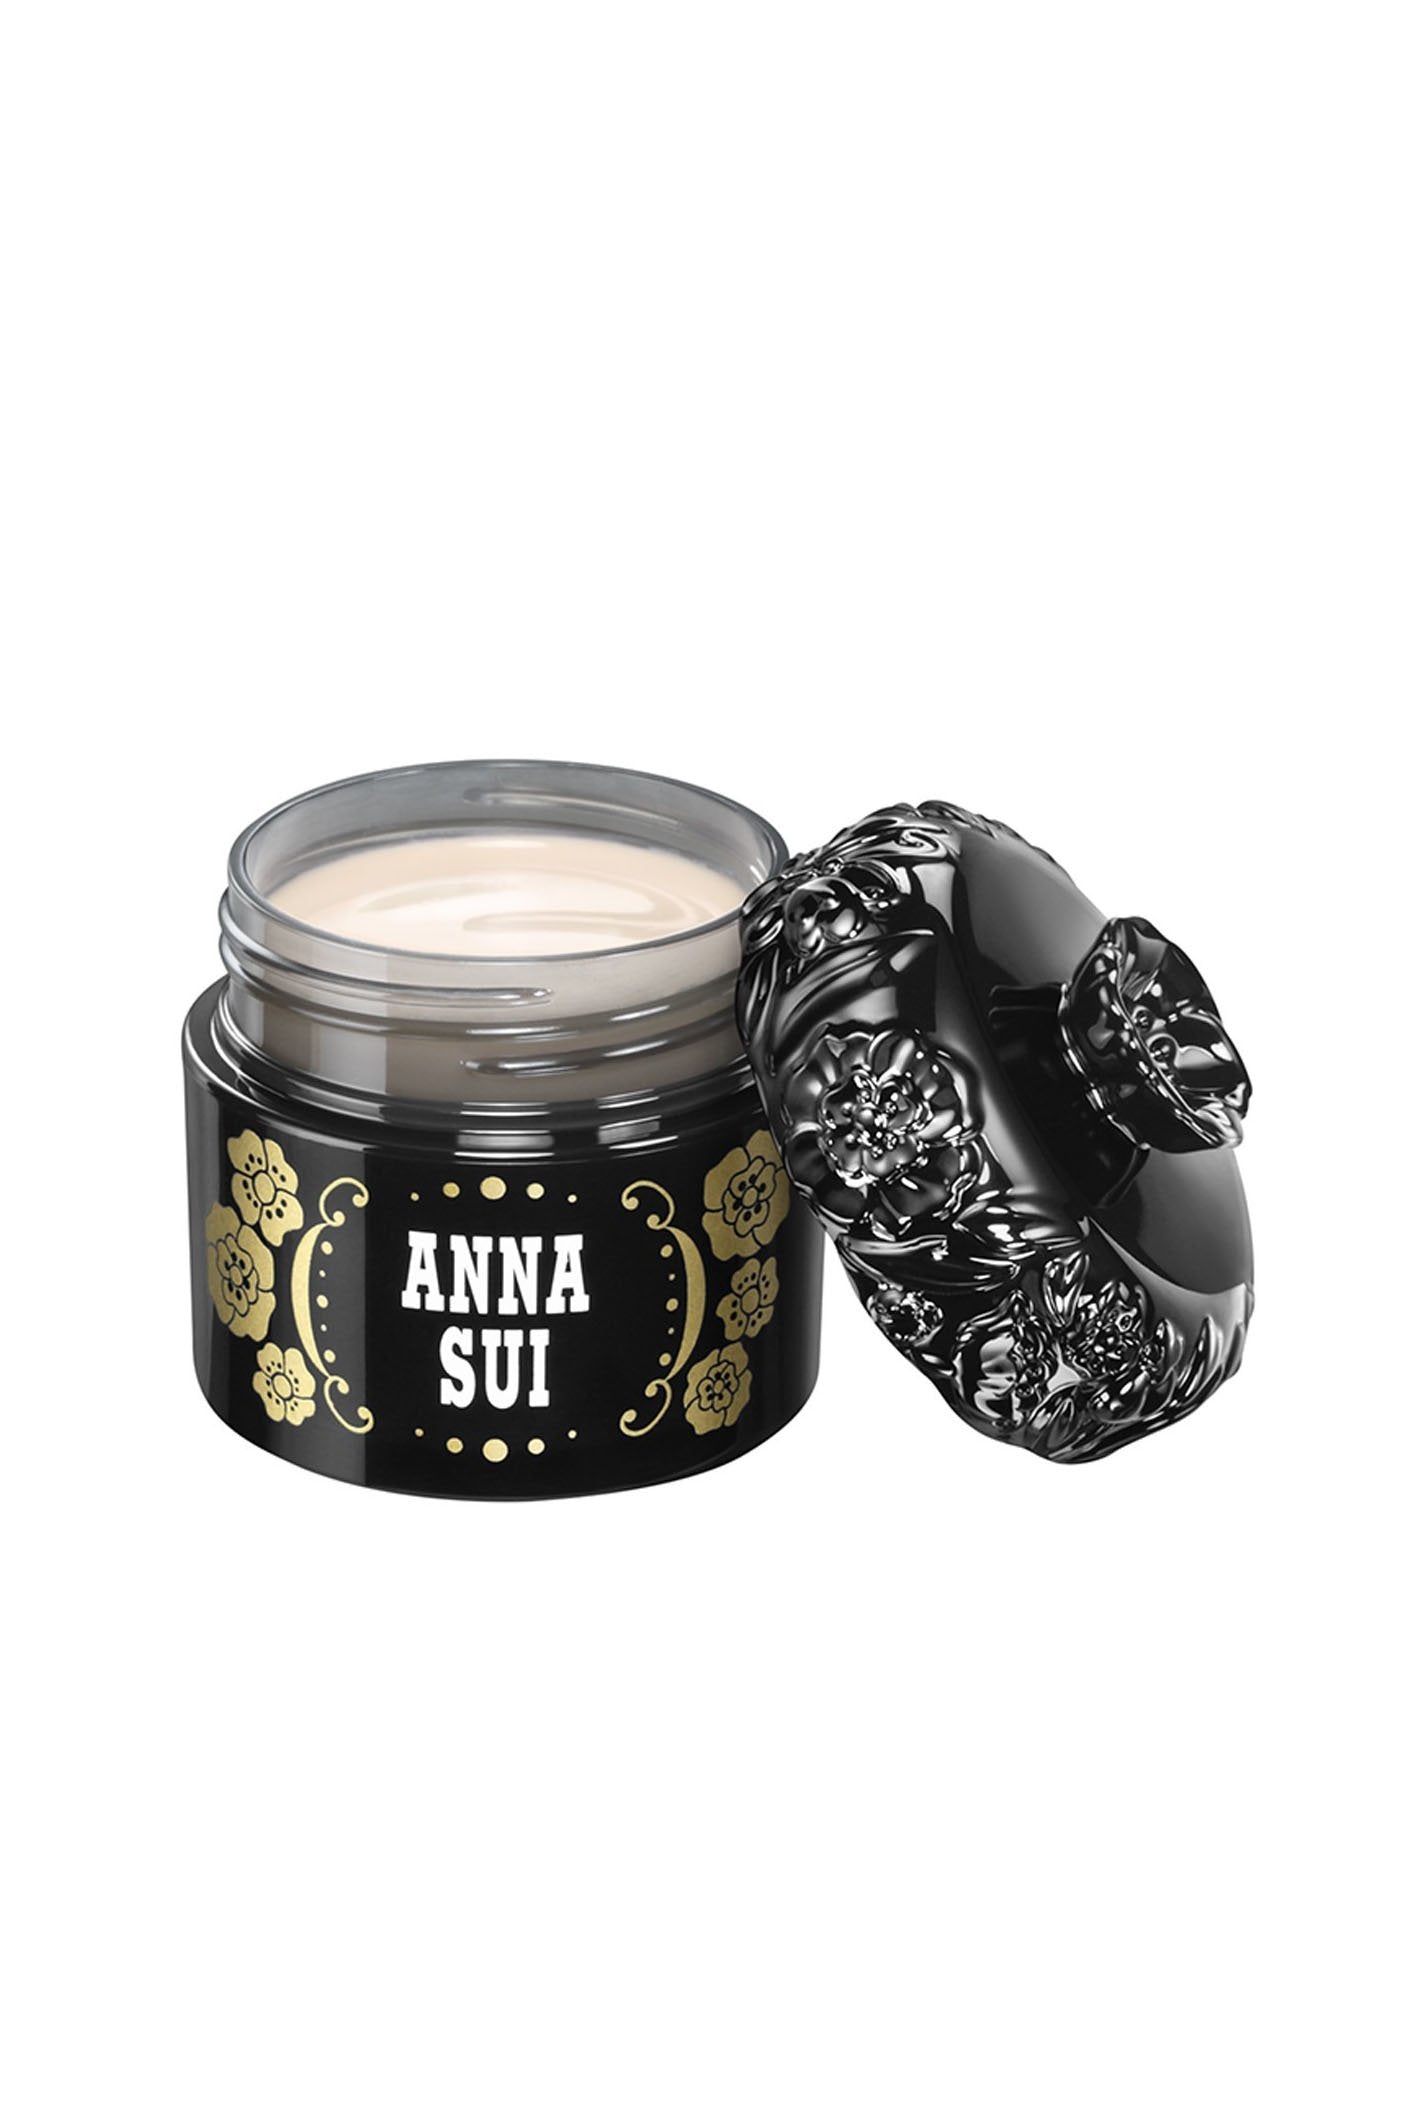 A black round case with a floral design and Anna Sui, the lid, black with raised rose pattern around, and a rose at the top